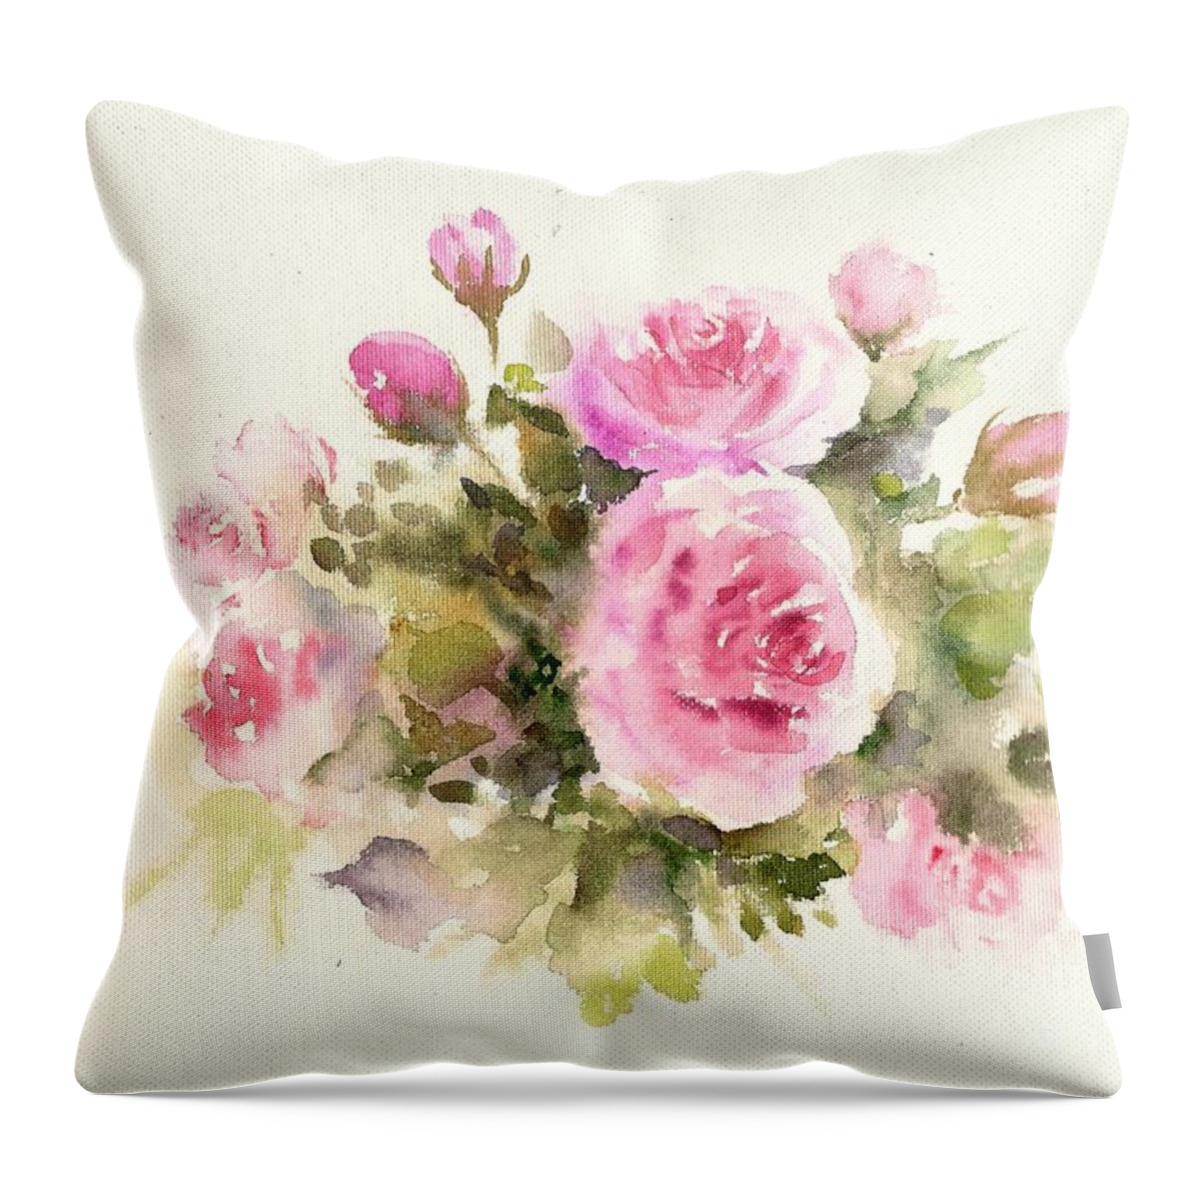 Bunch Of Roses Throw Pillow featuring the painting Bunch of roses by Asha Sudhaker Shenoy